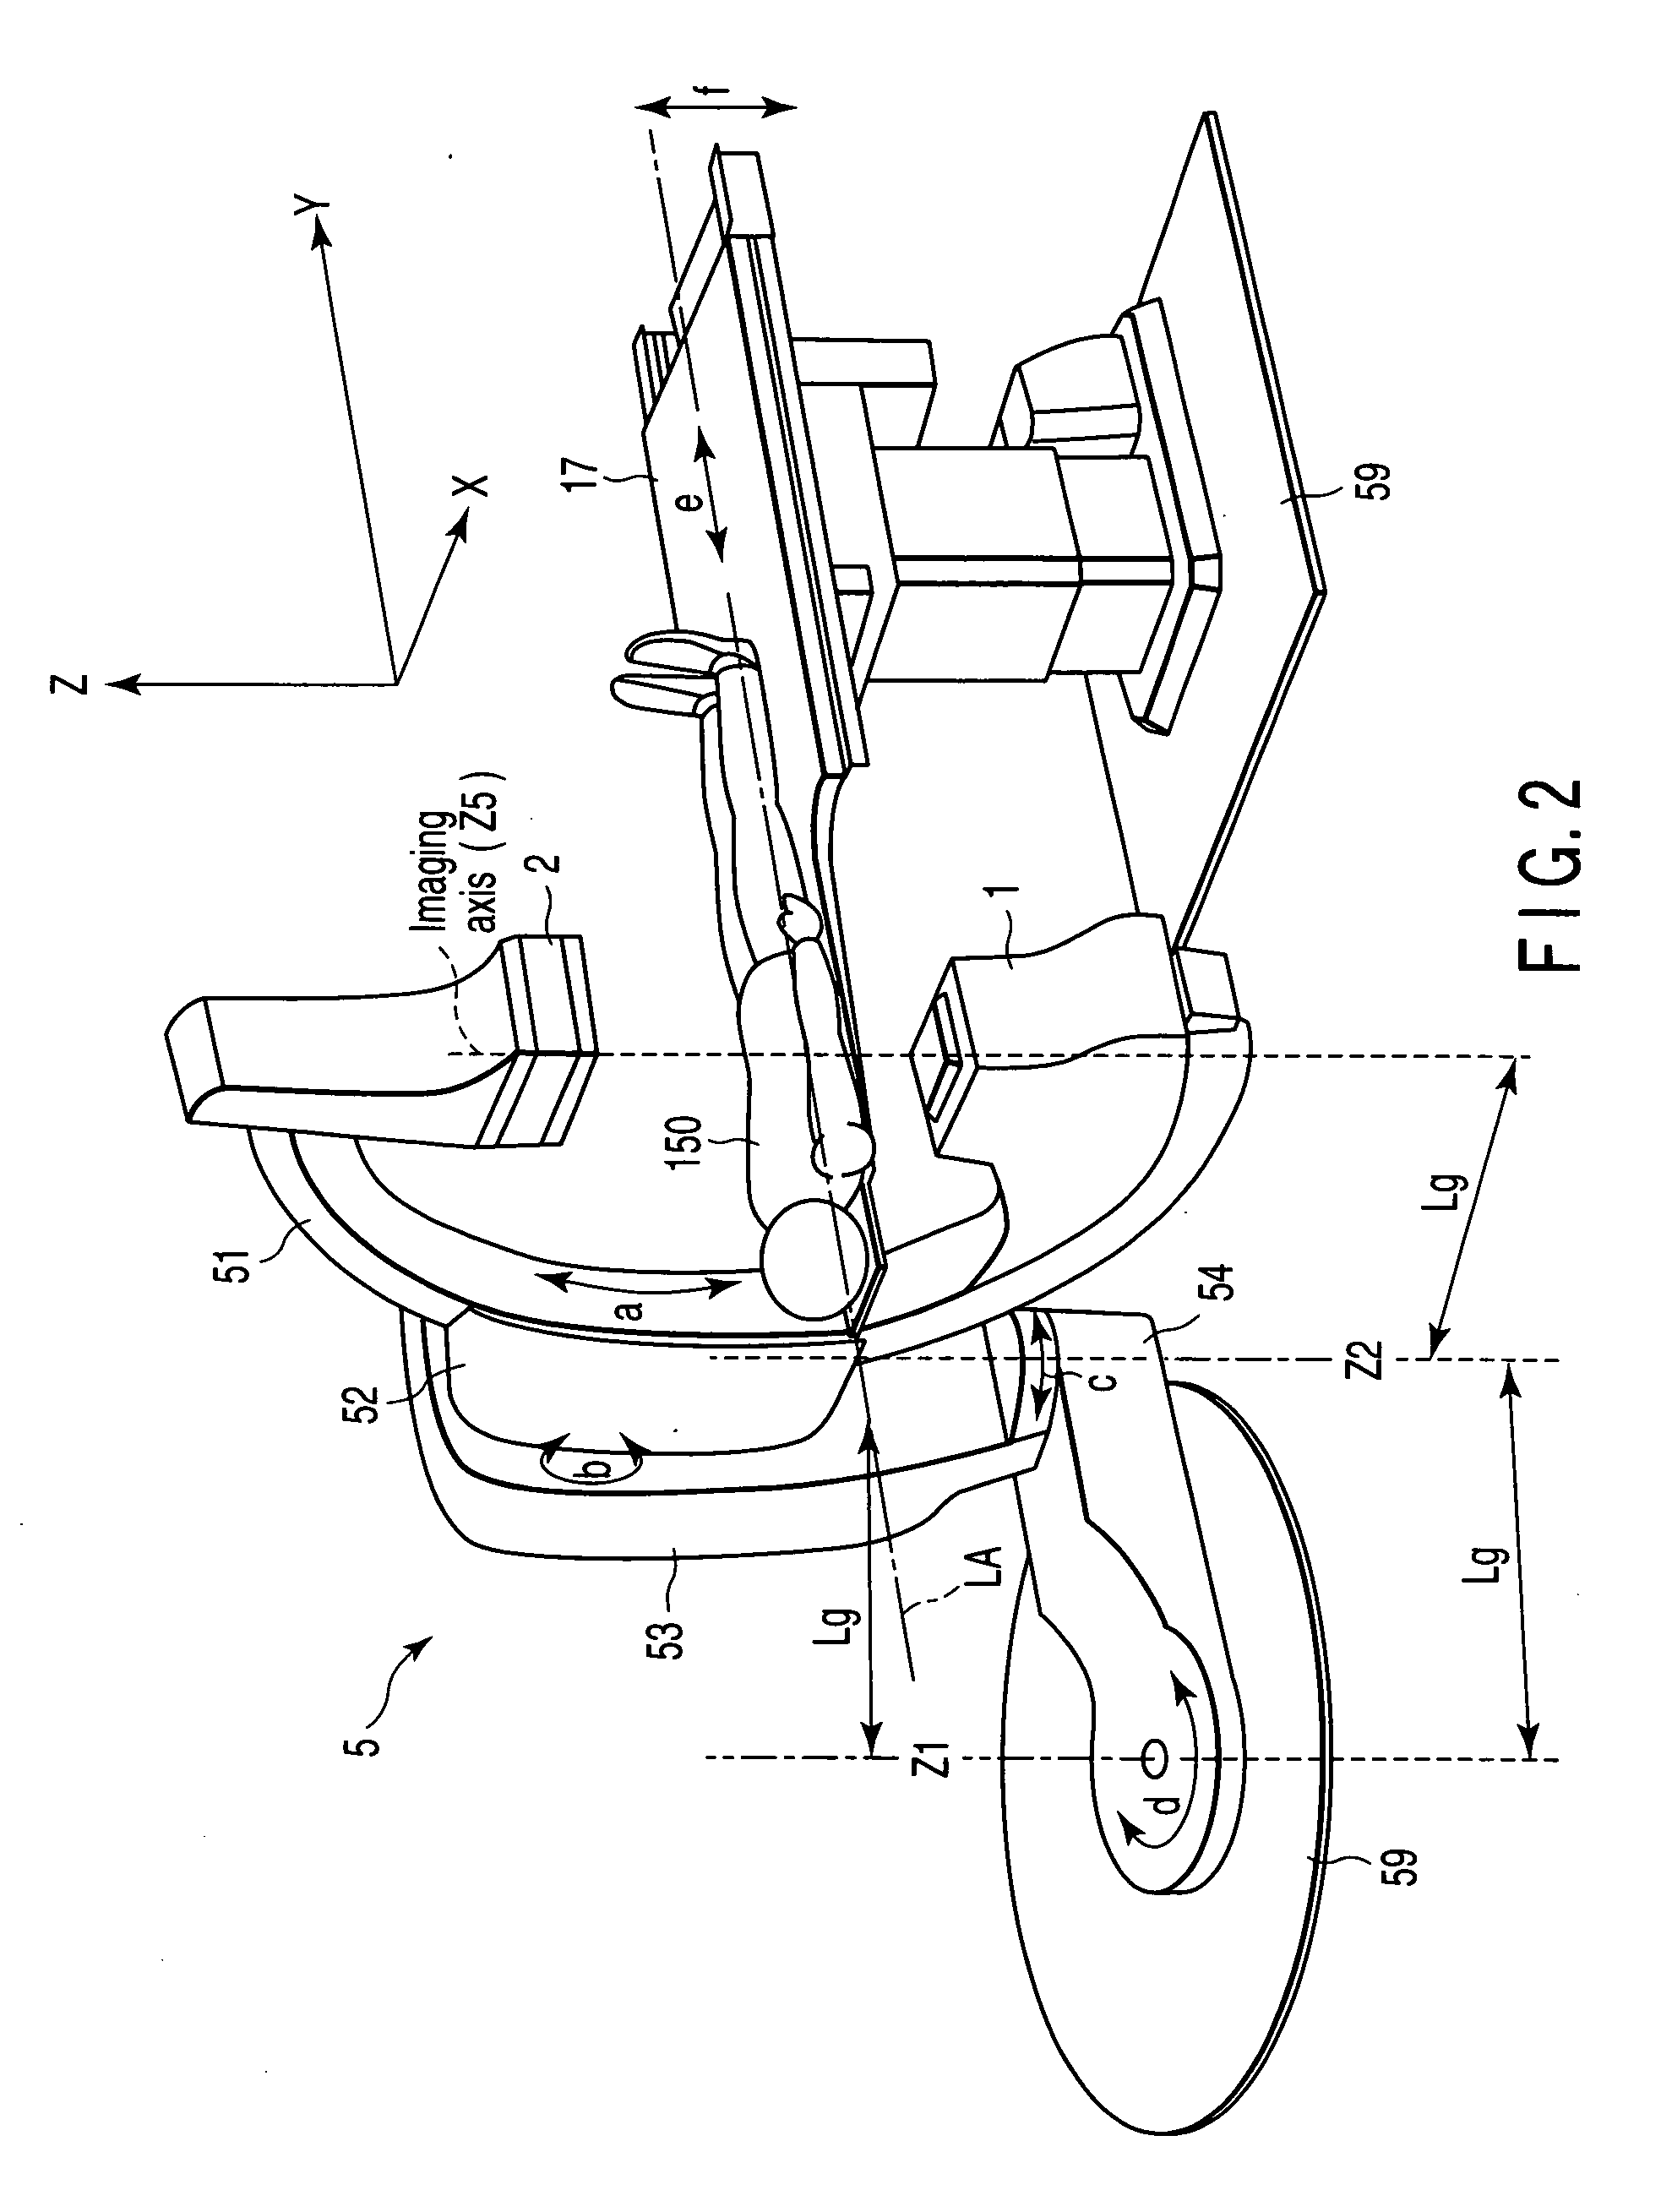 C-arm holding apparatus and X-ray diagnostic apparatus